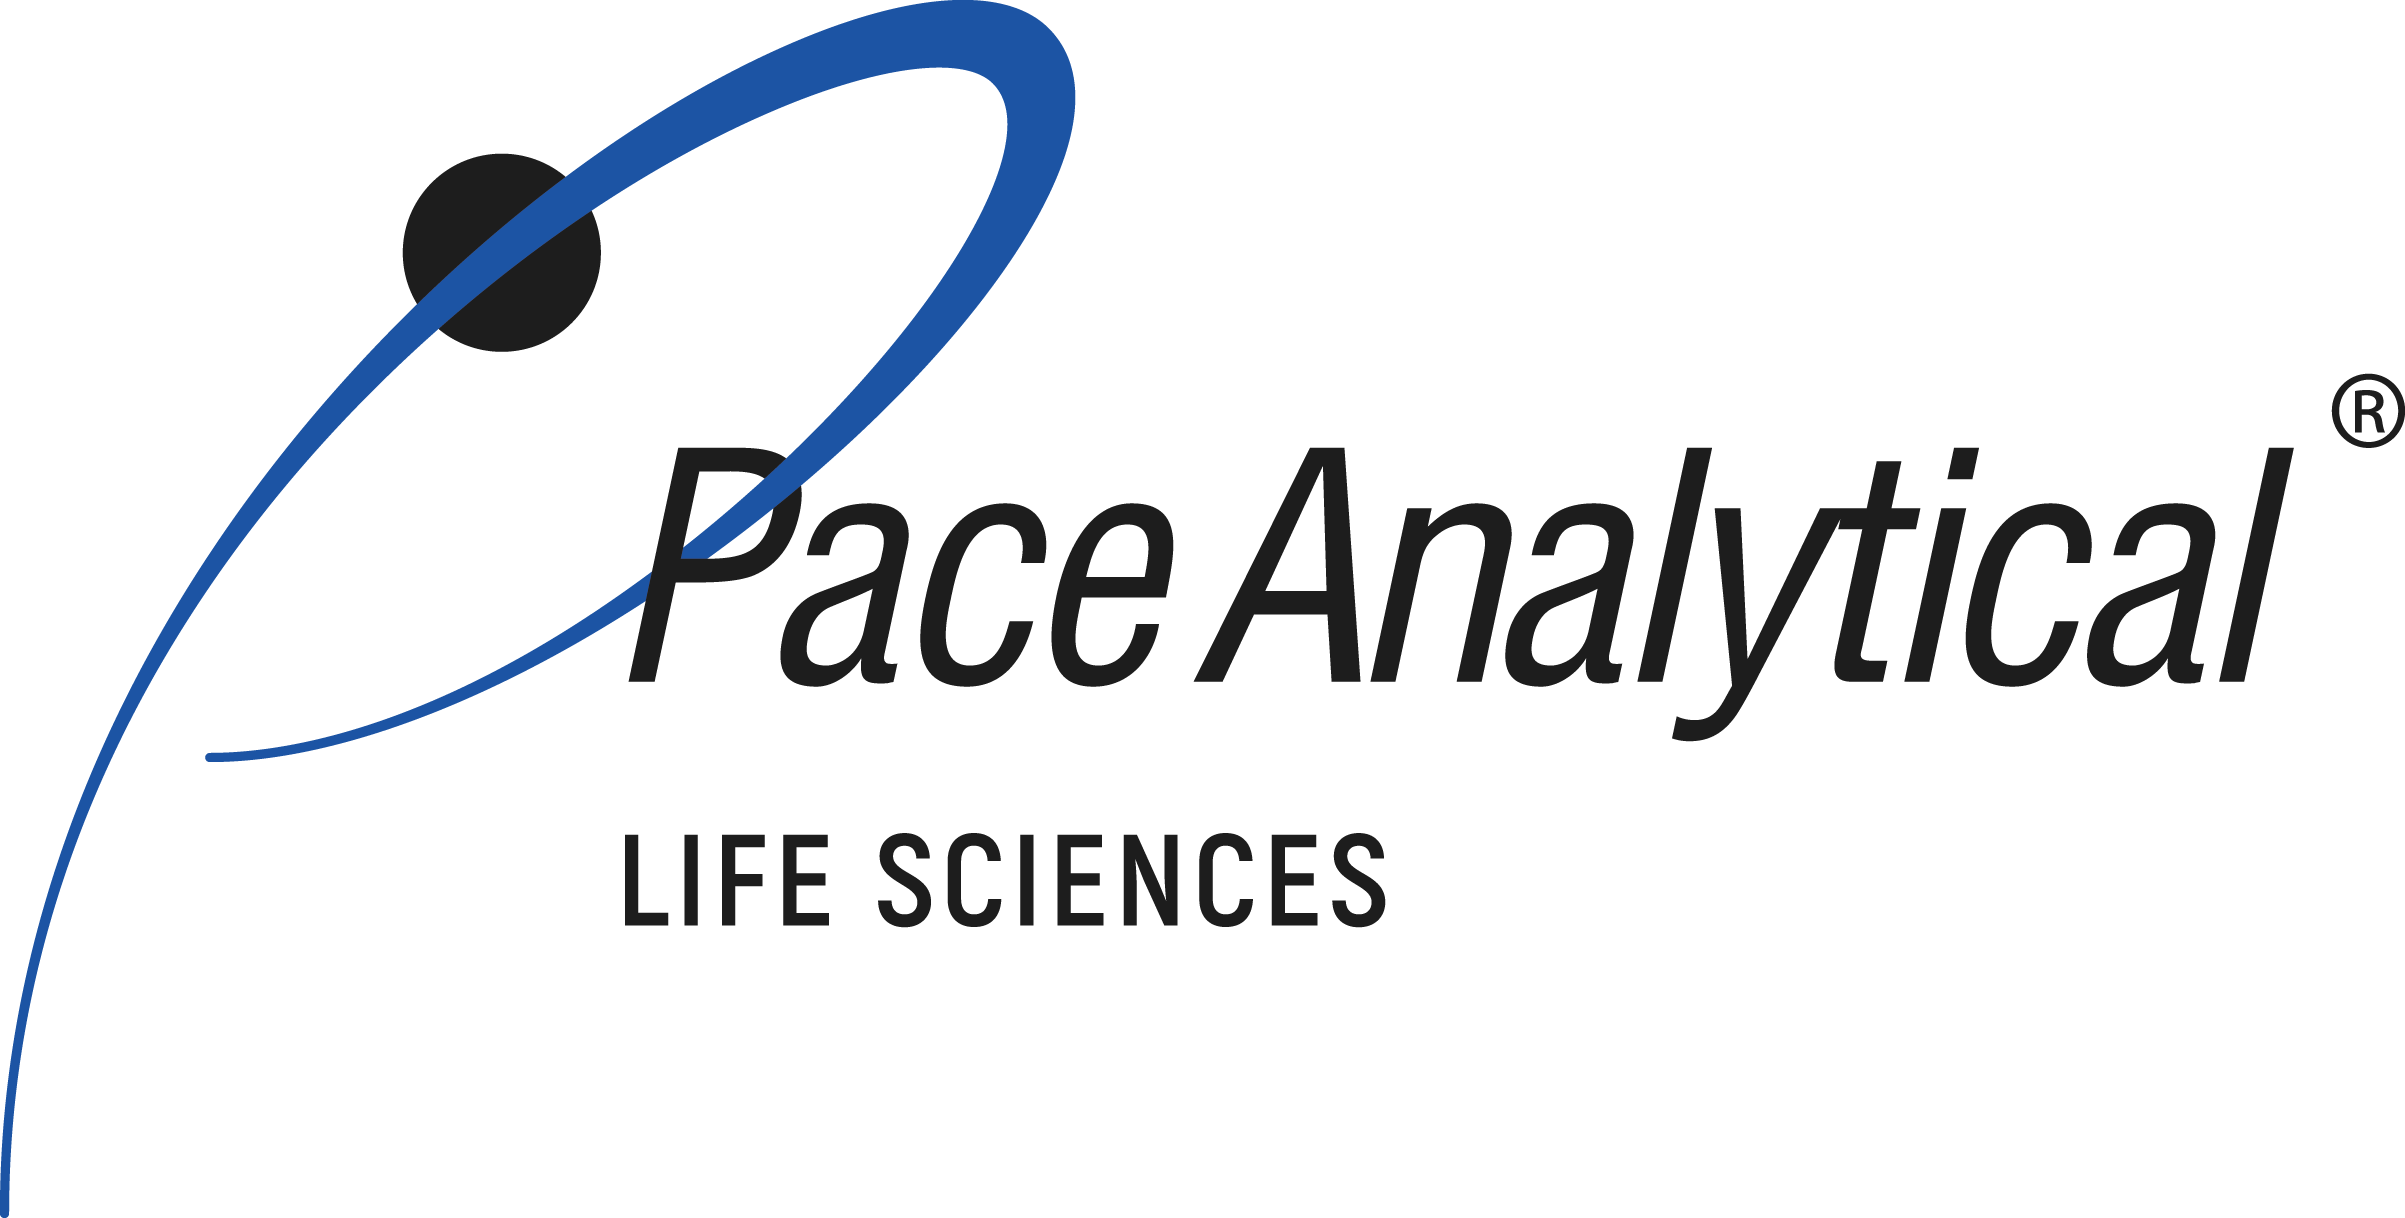 Pace Analytical Life Sciences, LLC